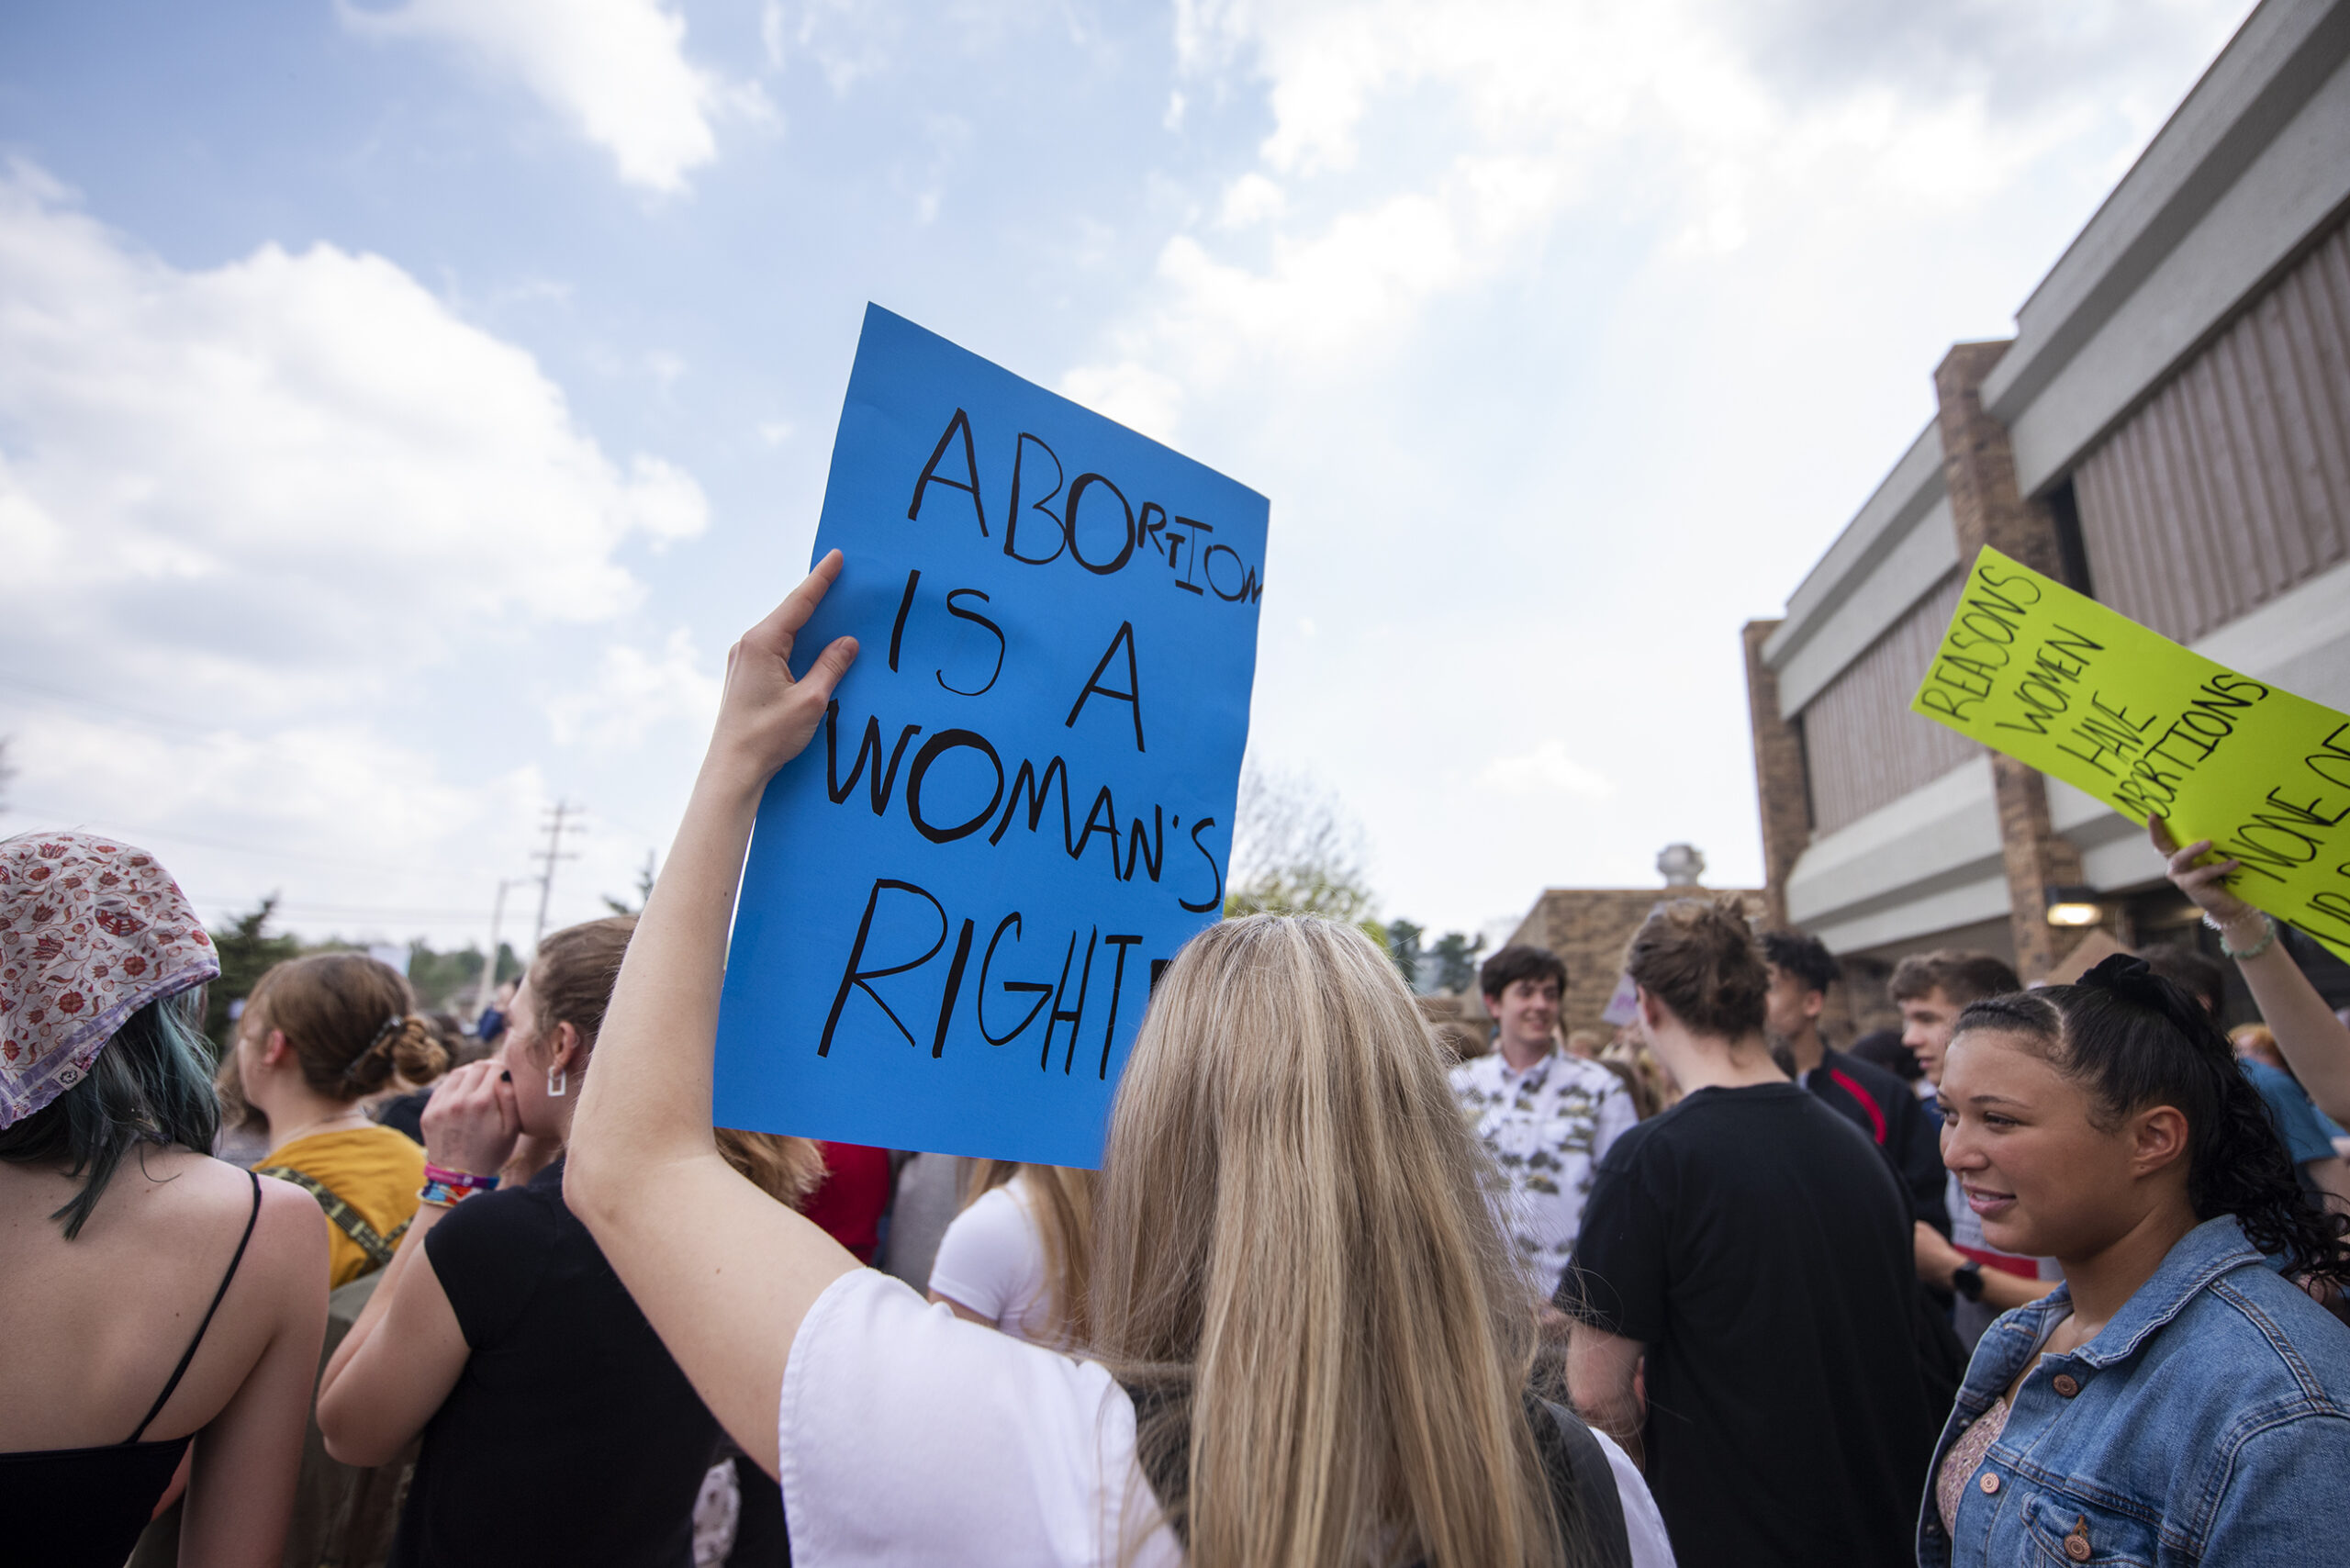 A blue sign that says "abortion is a woman's right" is held by a student.